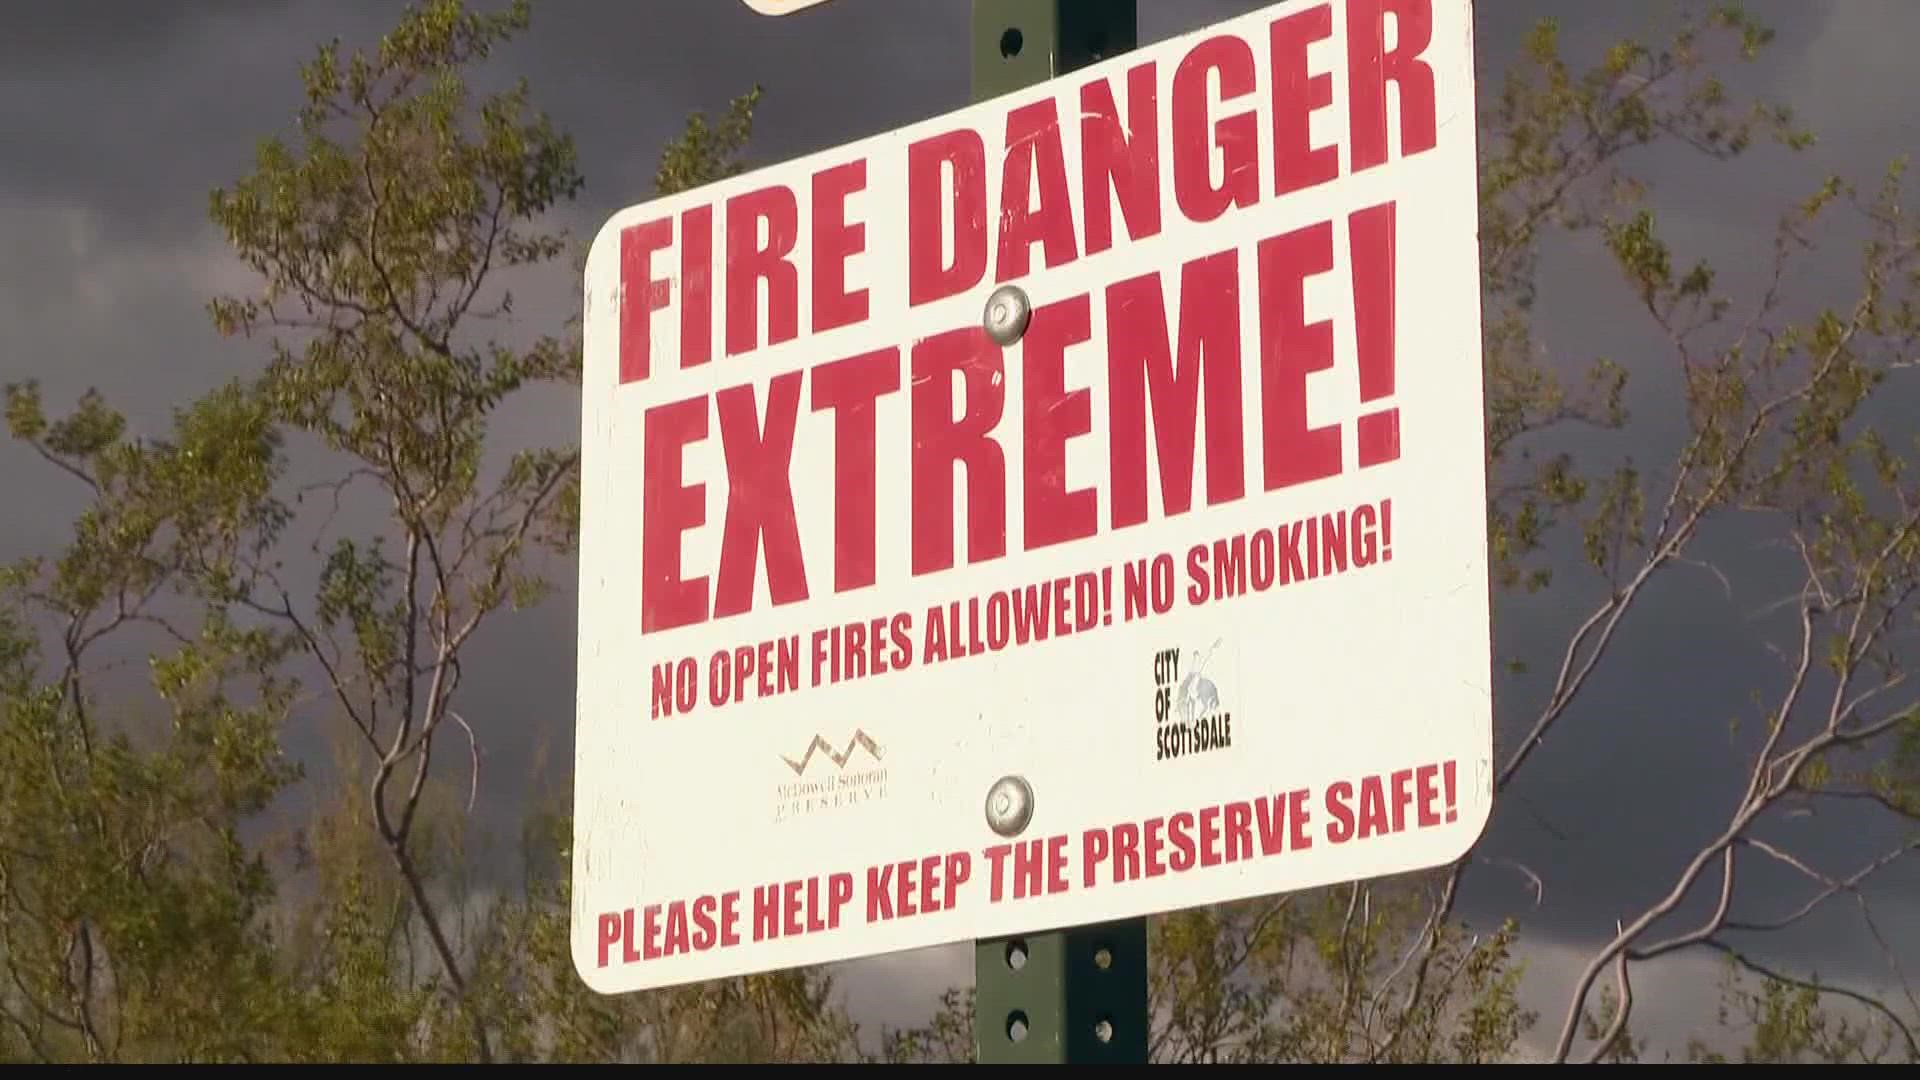 Fire restrictions are now in place in Maricopa County and in several of State 48's national forests.